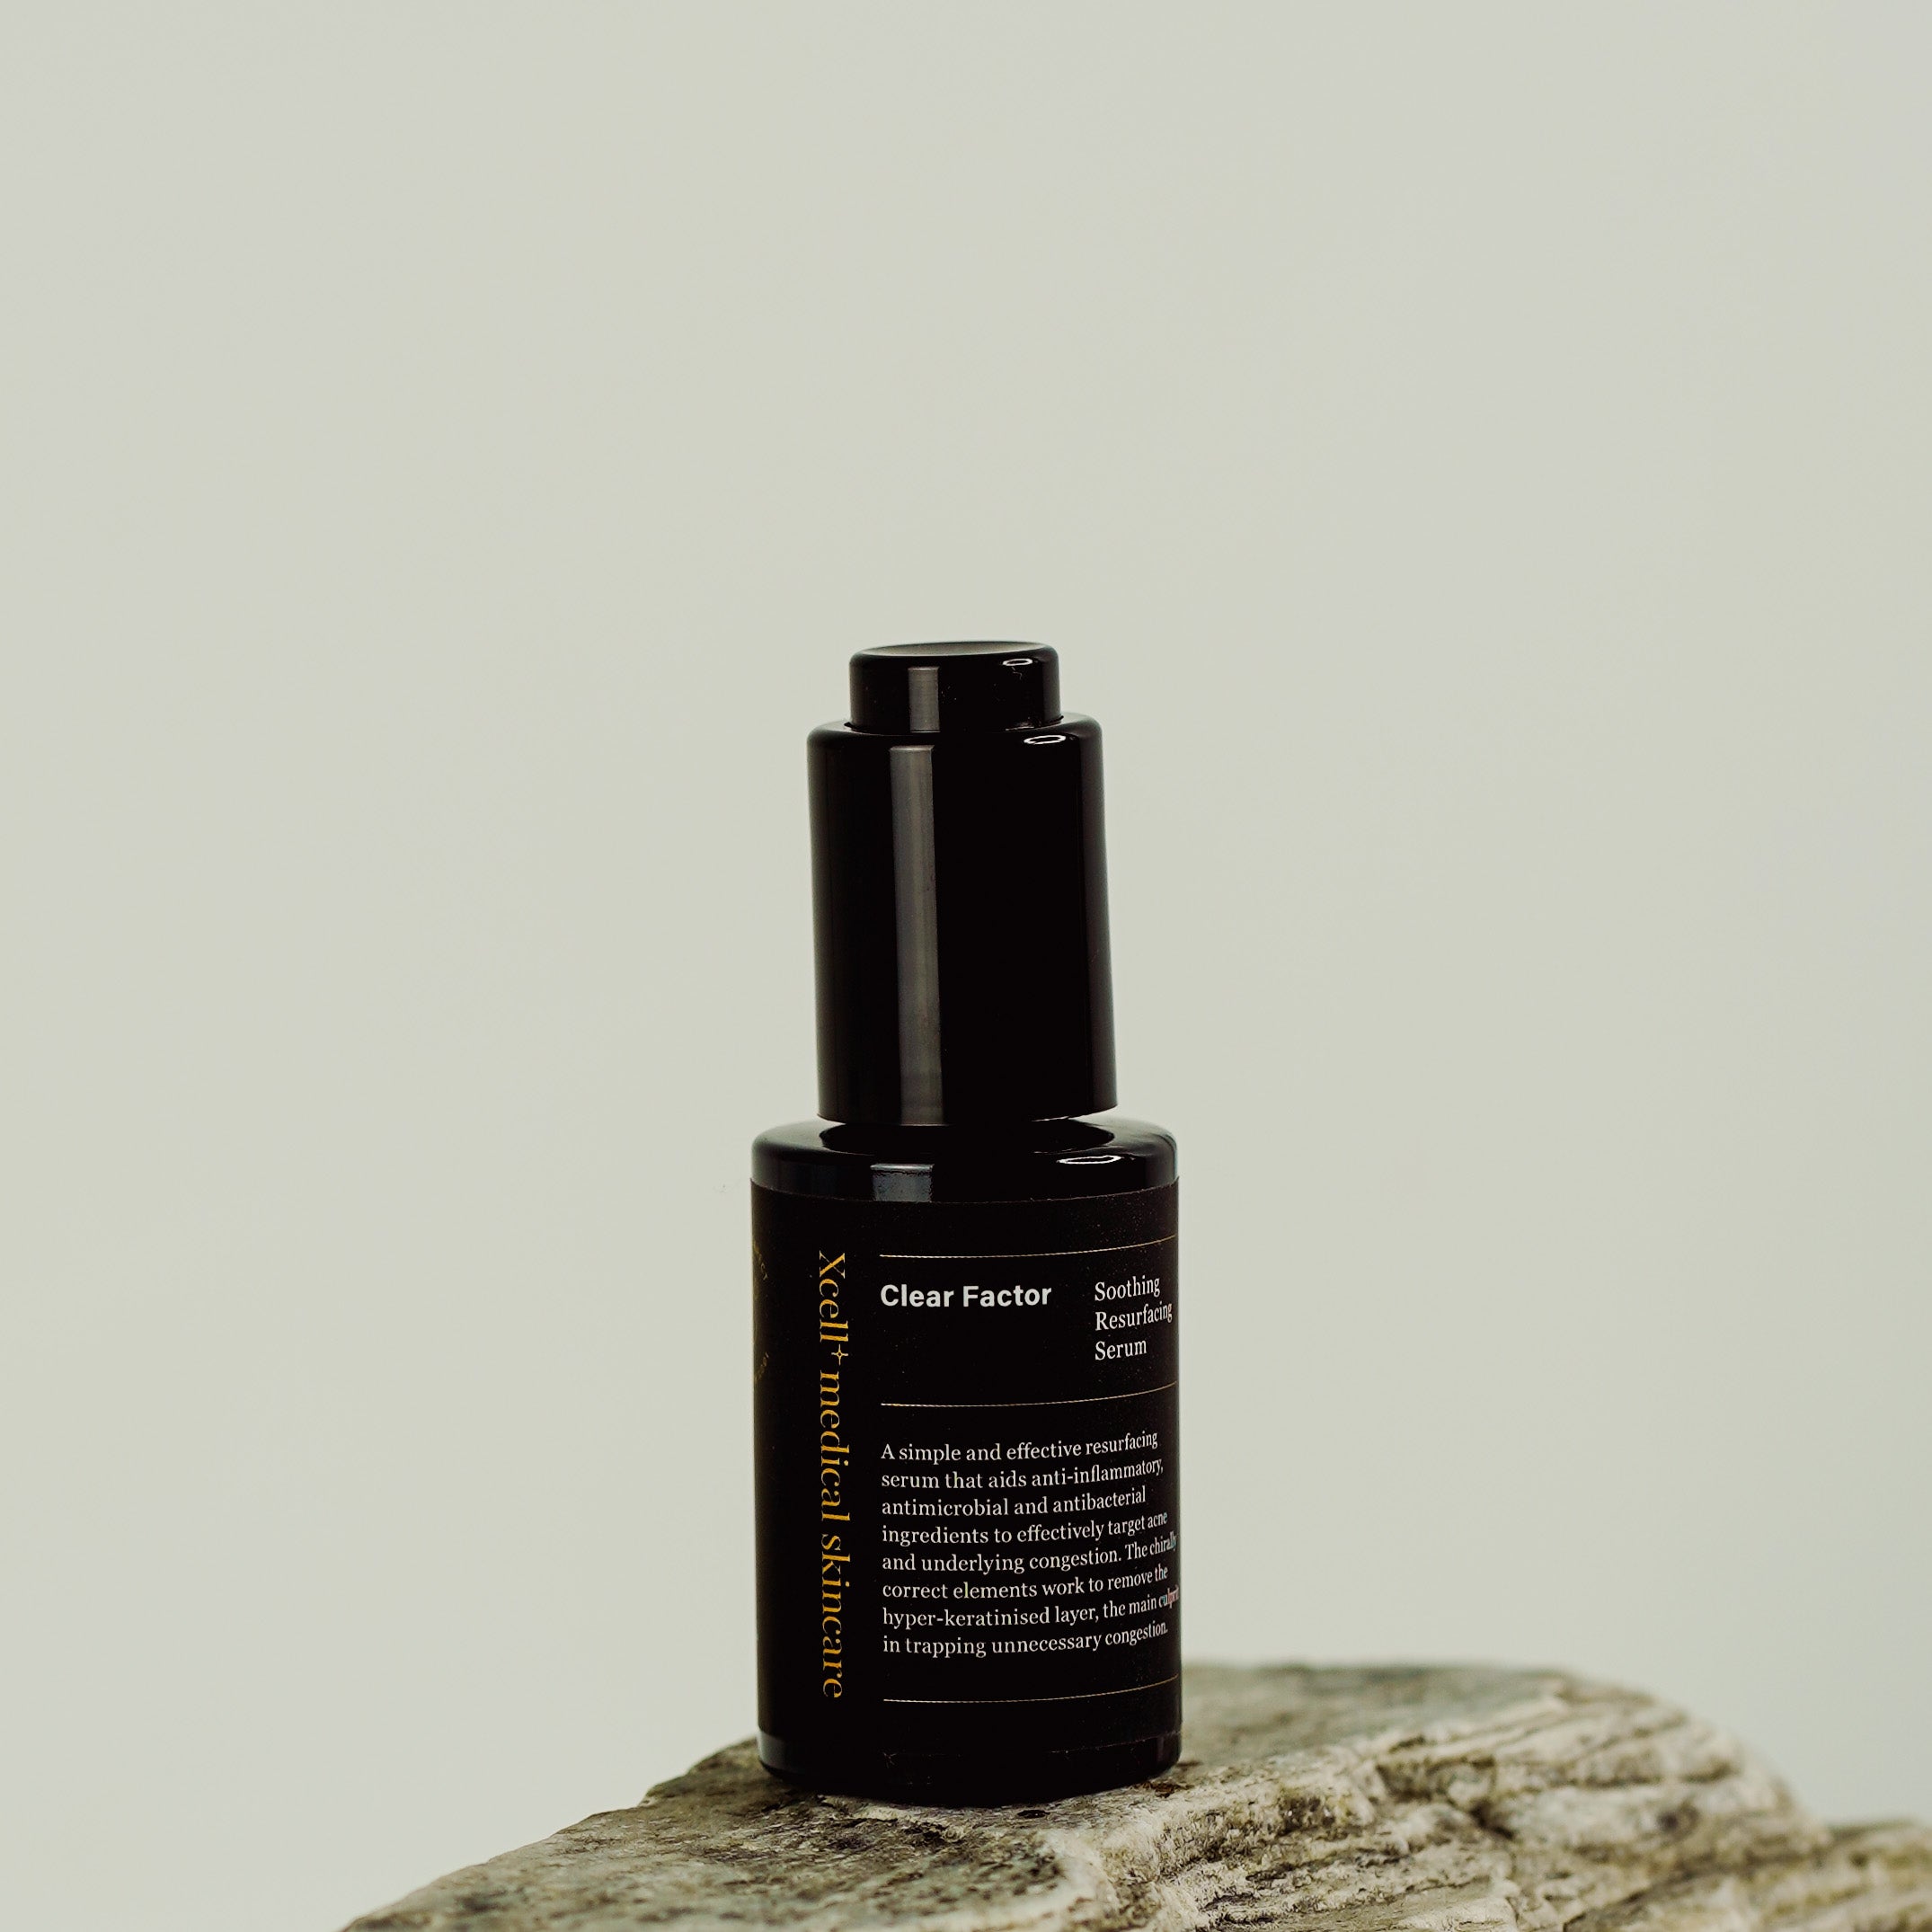 Clear Factor - Resurfacing and soothing serum targeting skin prone to breakouts 30ml